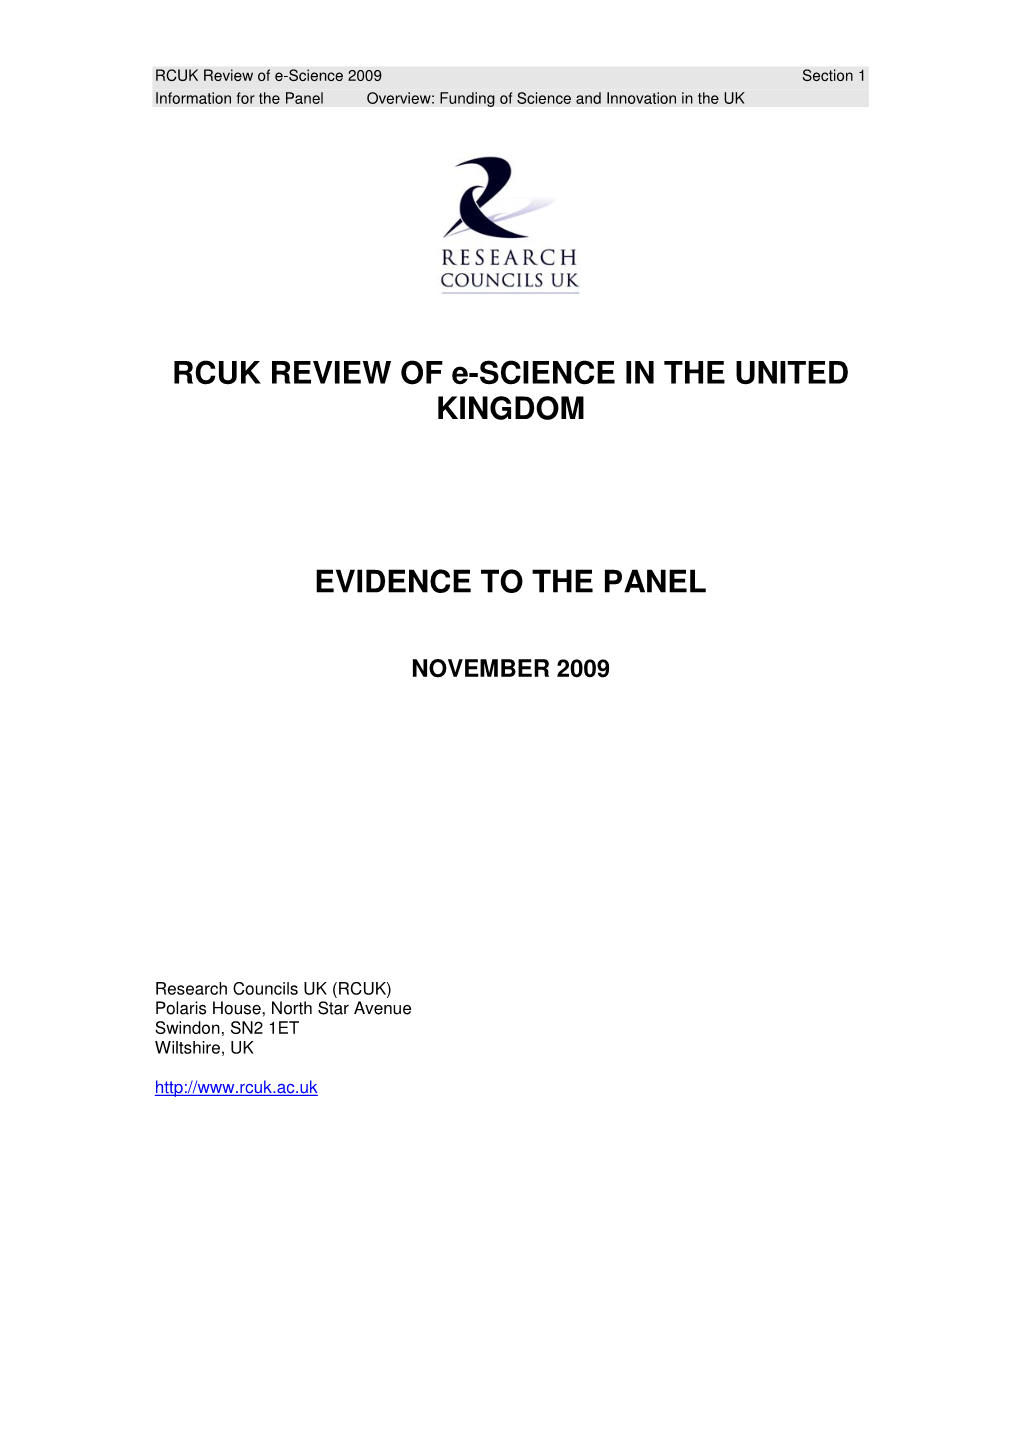 RCUK REVIEW of E-SCIENCE in the UNITED KINGDOM